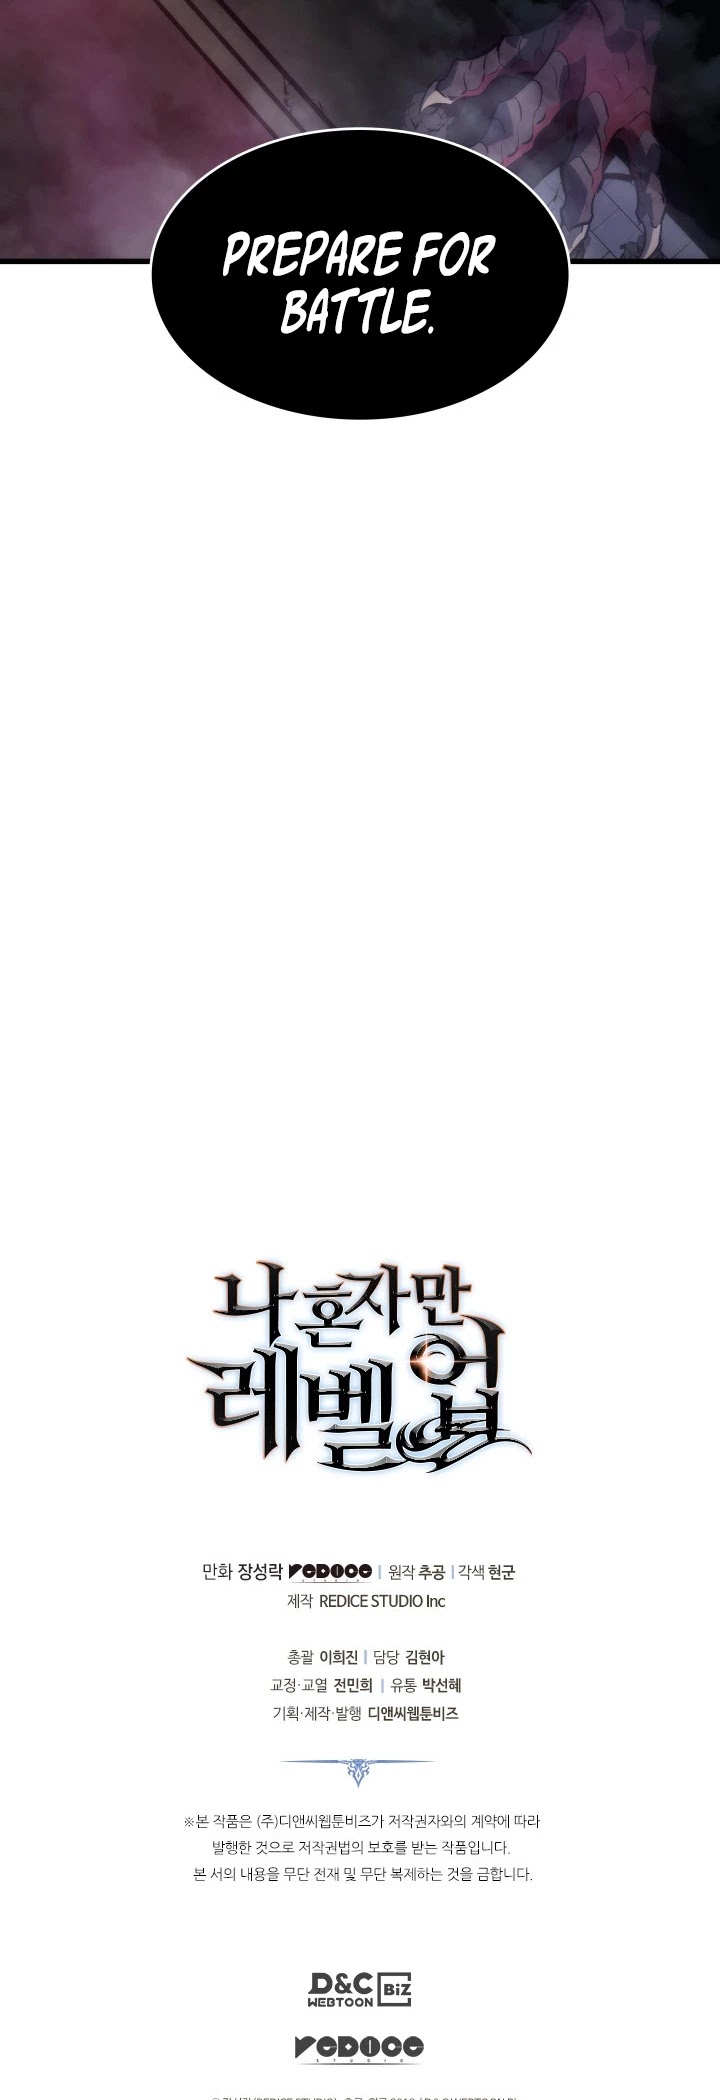 Solo Leveling Chapter 167